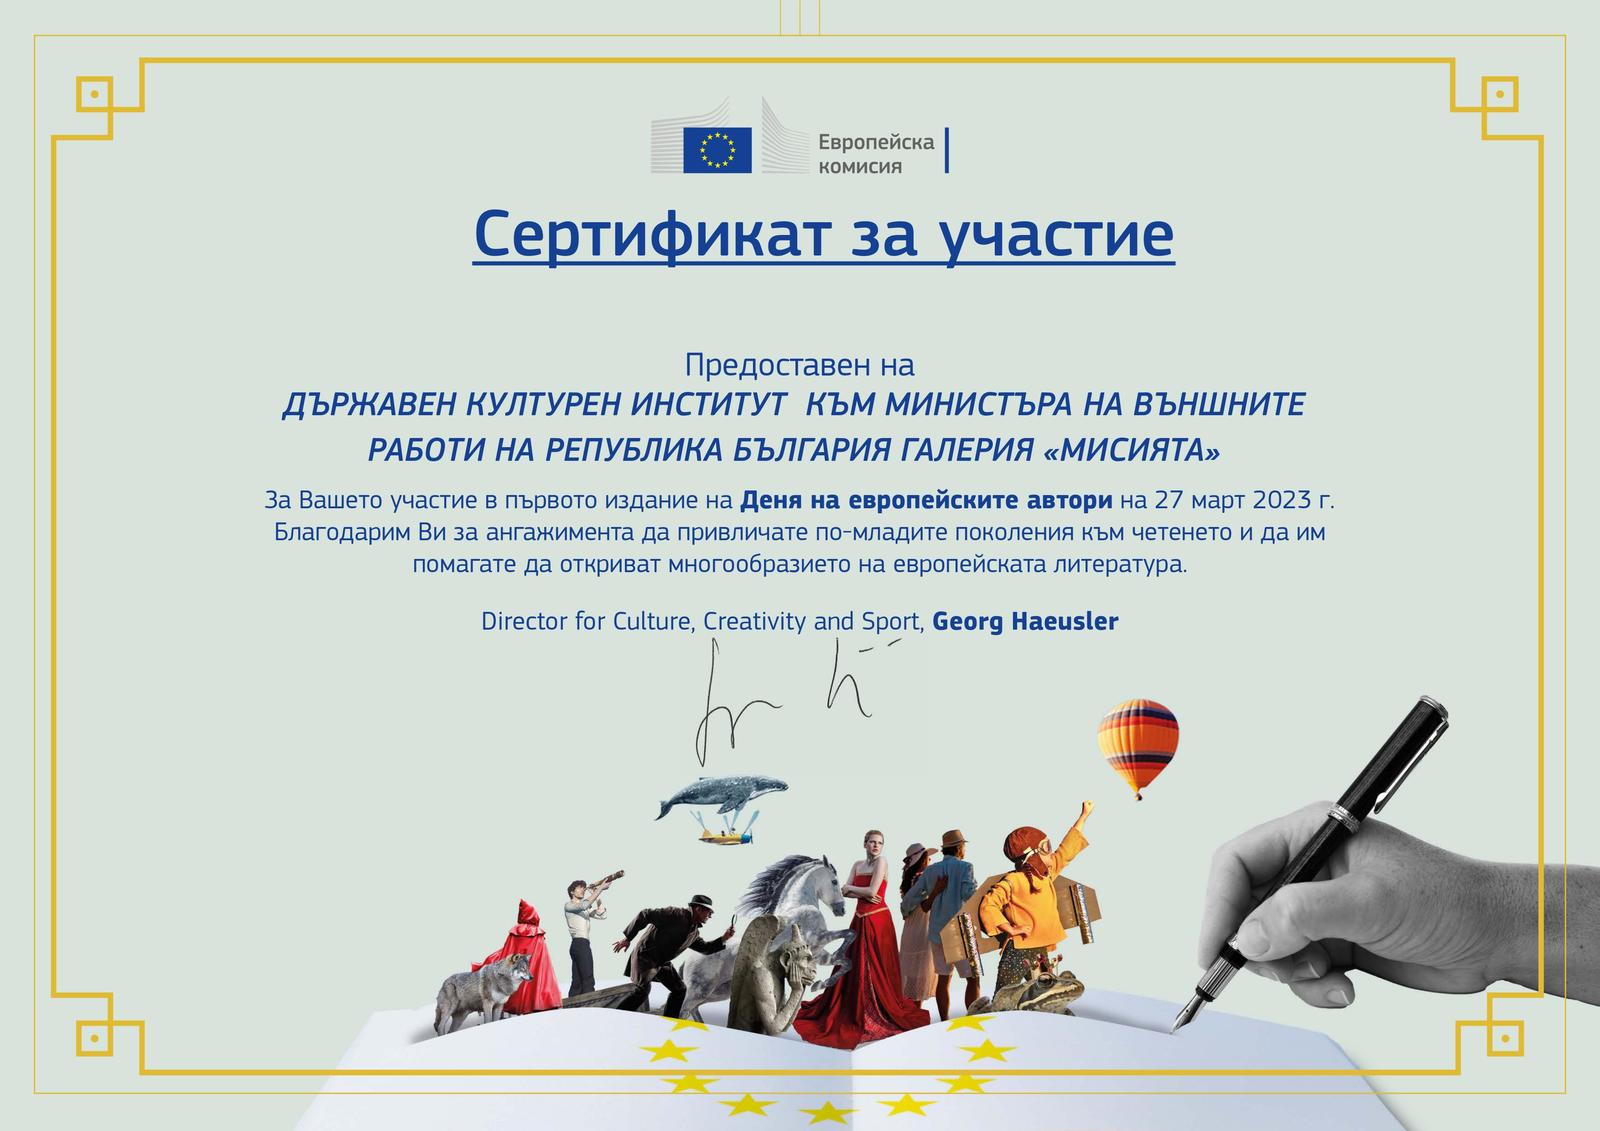 The State Cultural Institute Received a Certificate for Participation in the Day of European Authors